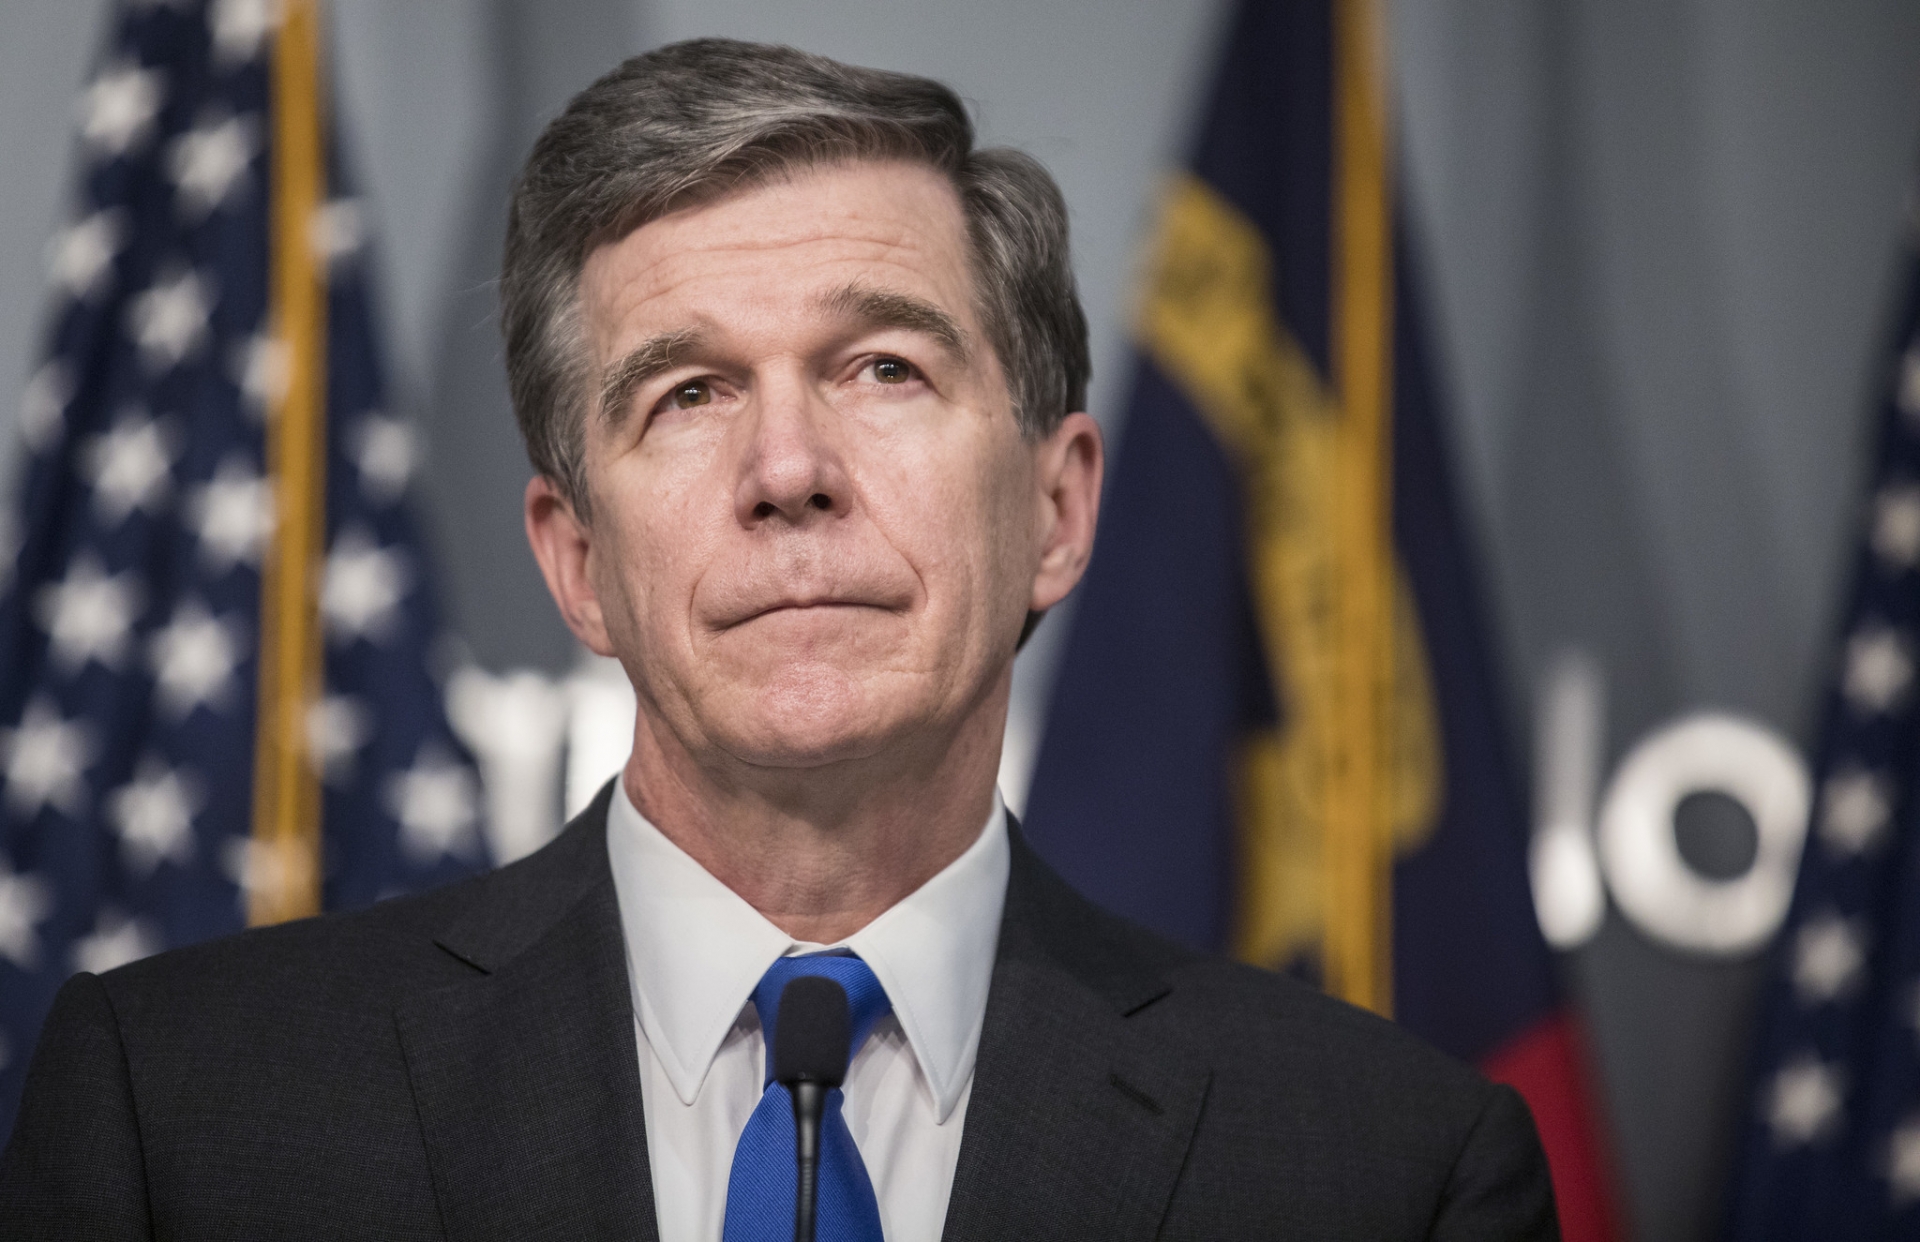 Who is North Carolina's Governor: Roy Cooper?